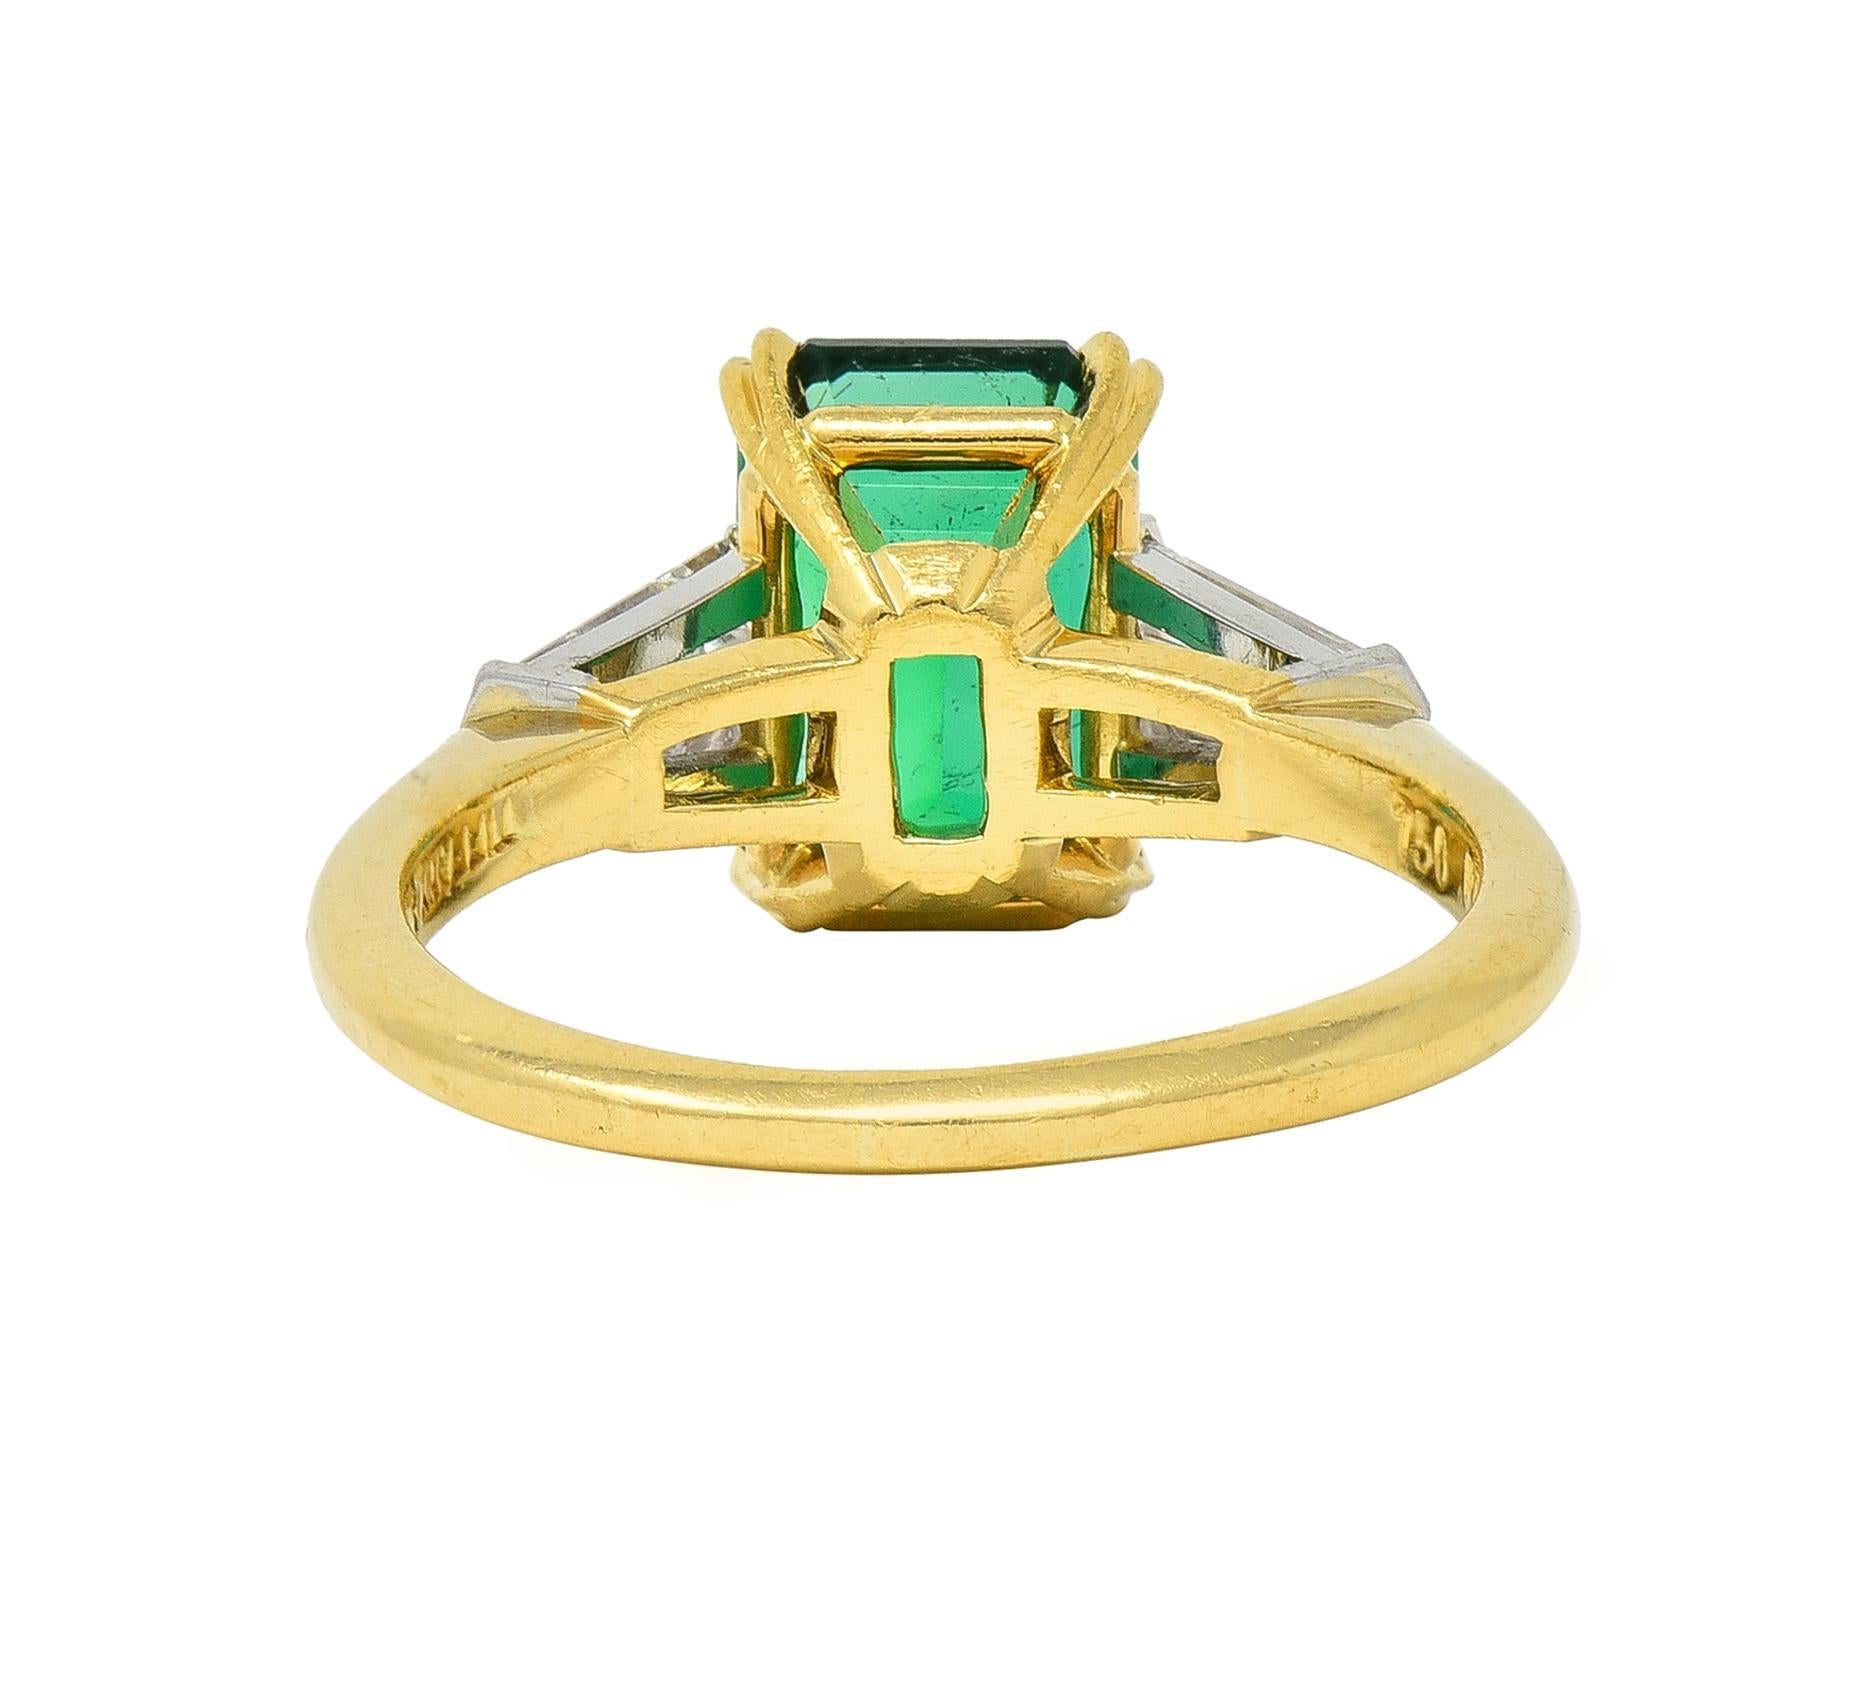 Tiffany & Co. 3.15 CTW Emerald Diamond Platinum 18 Karat Gold Vintage Ring AGL In Excellent Condition For Sale In Philadelphia, PA